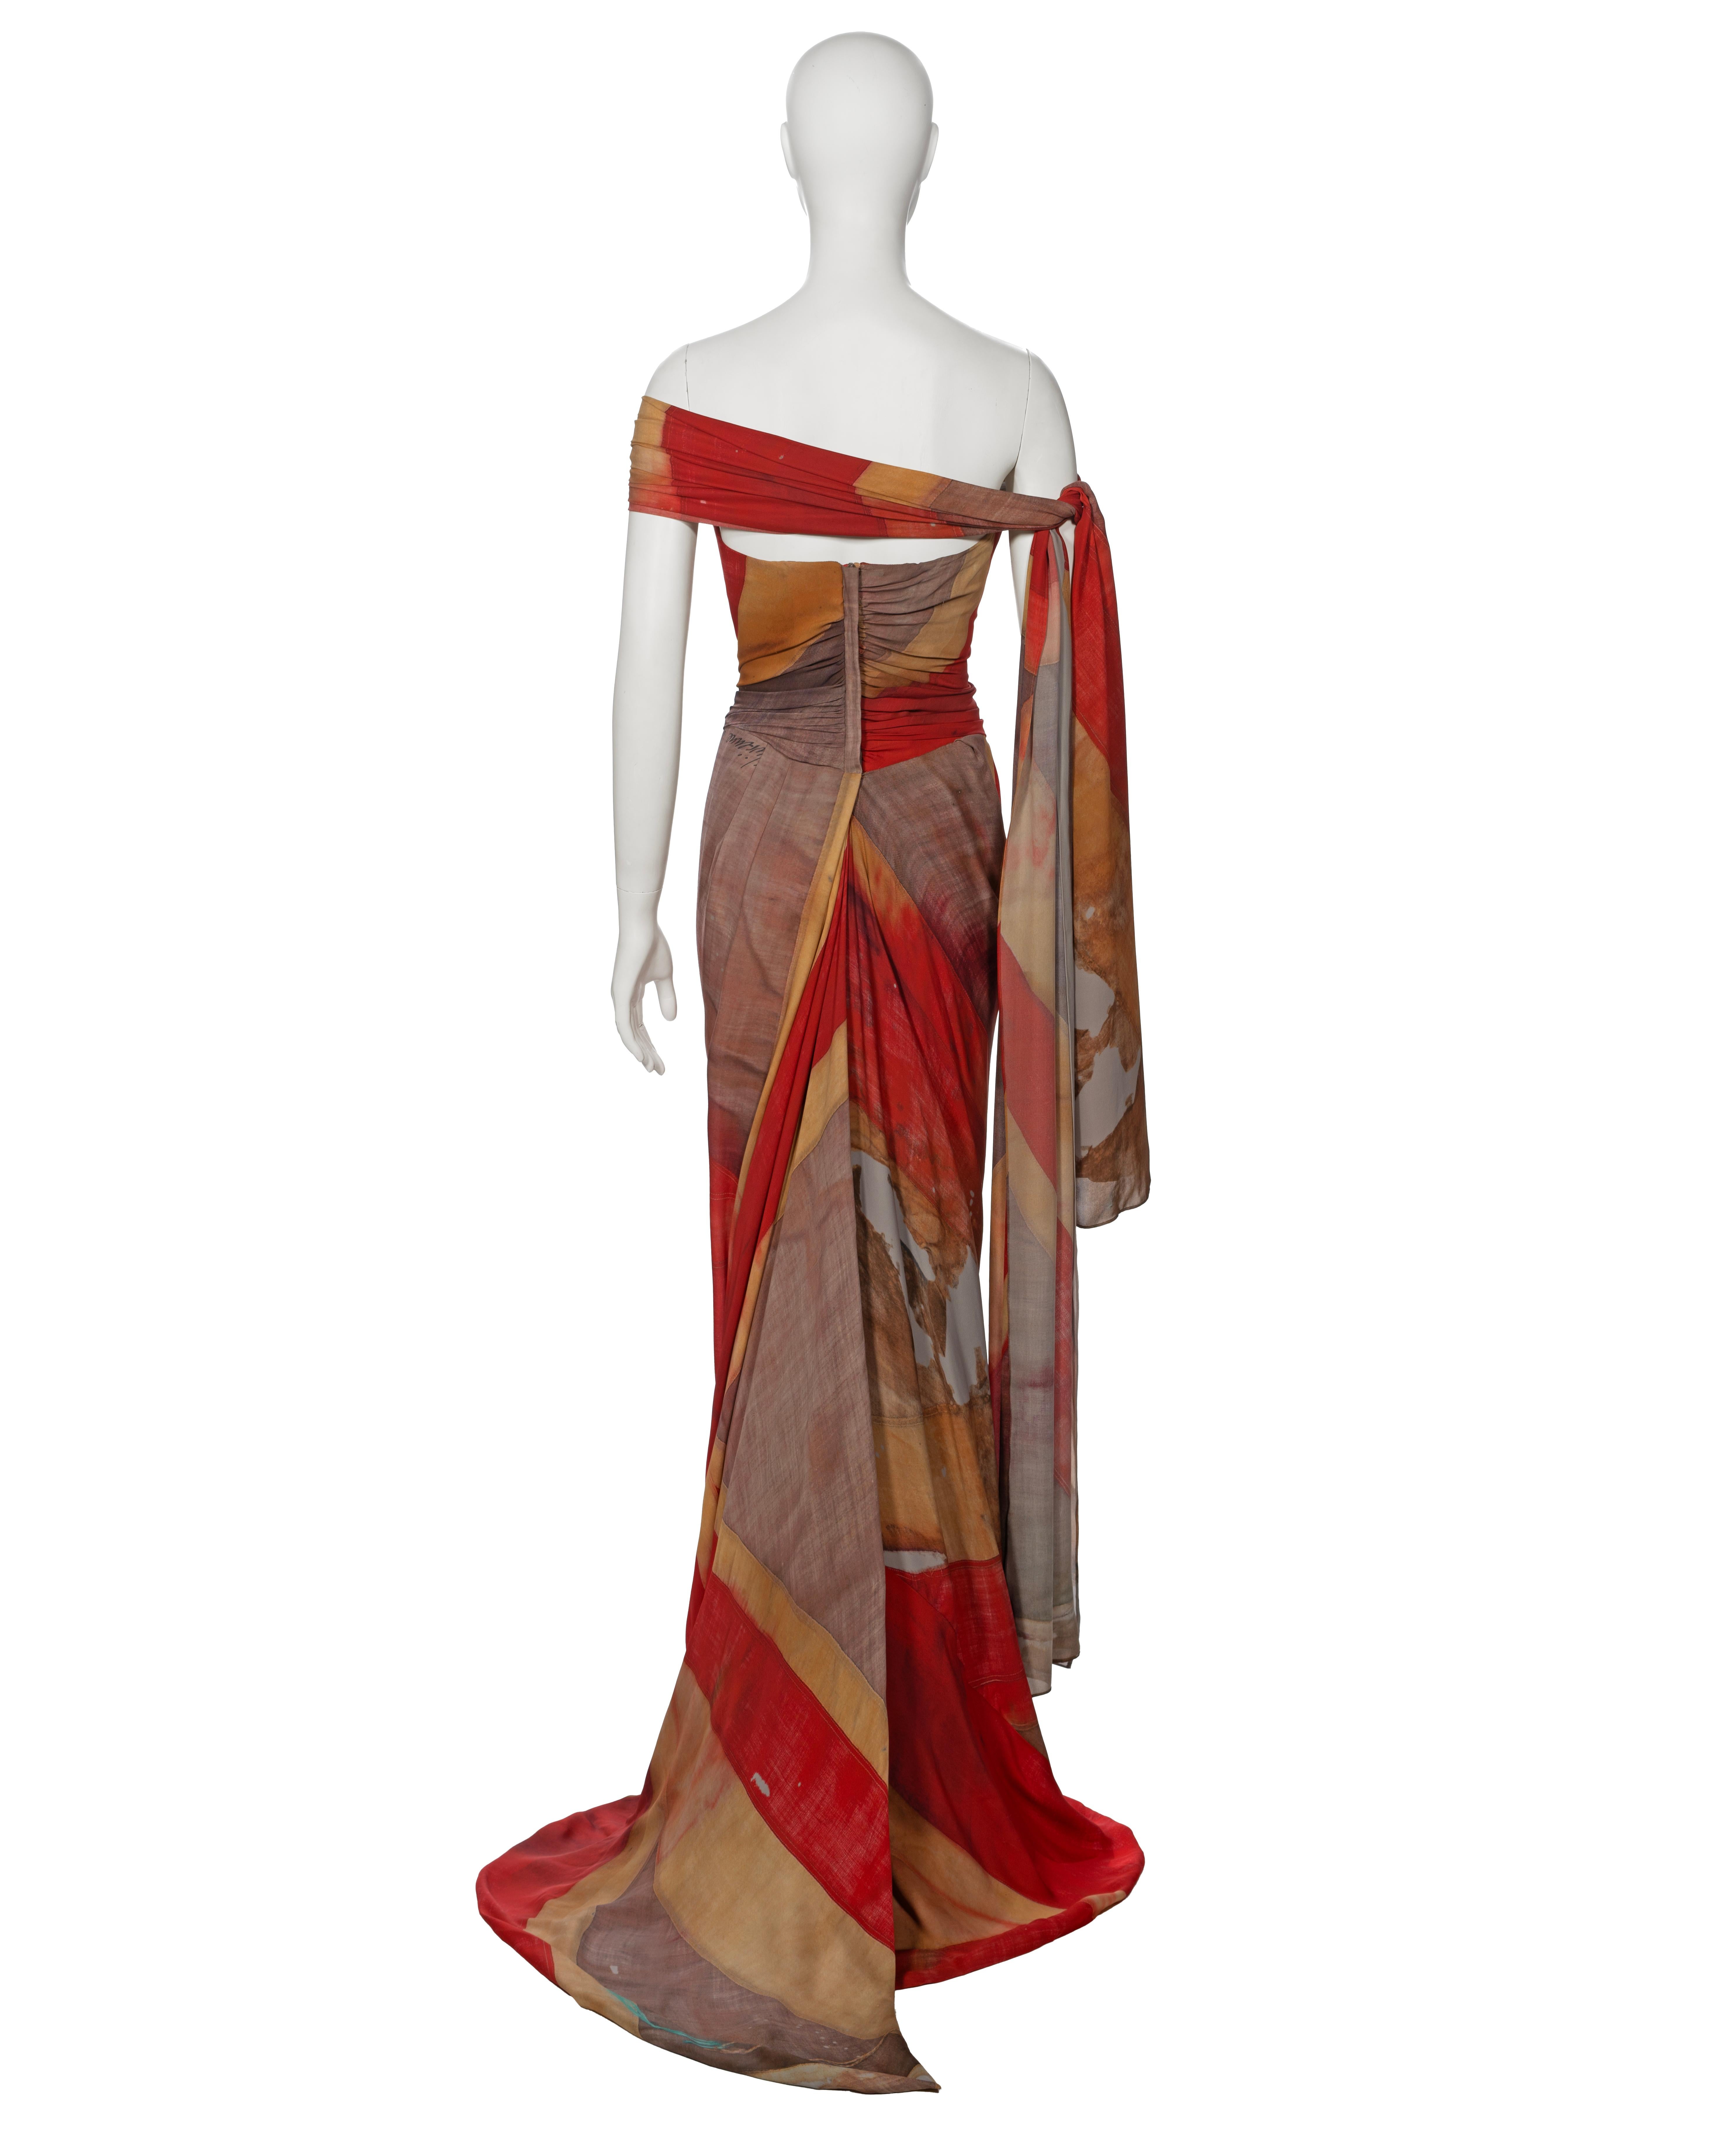 Vivienne Westwood The Queen's Diamond Jubilee Corseted Draped Silk Dress, 2012 For Sale 5